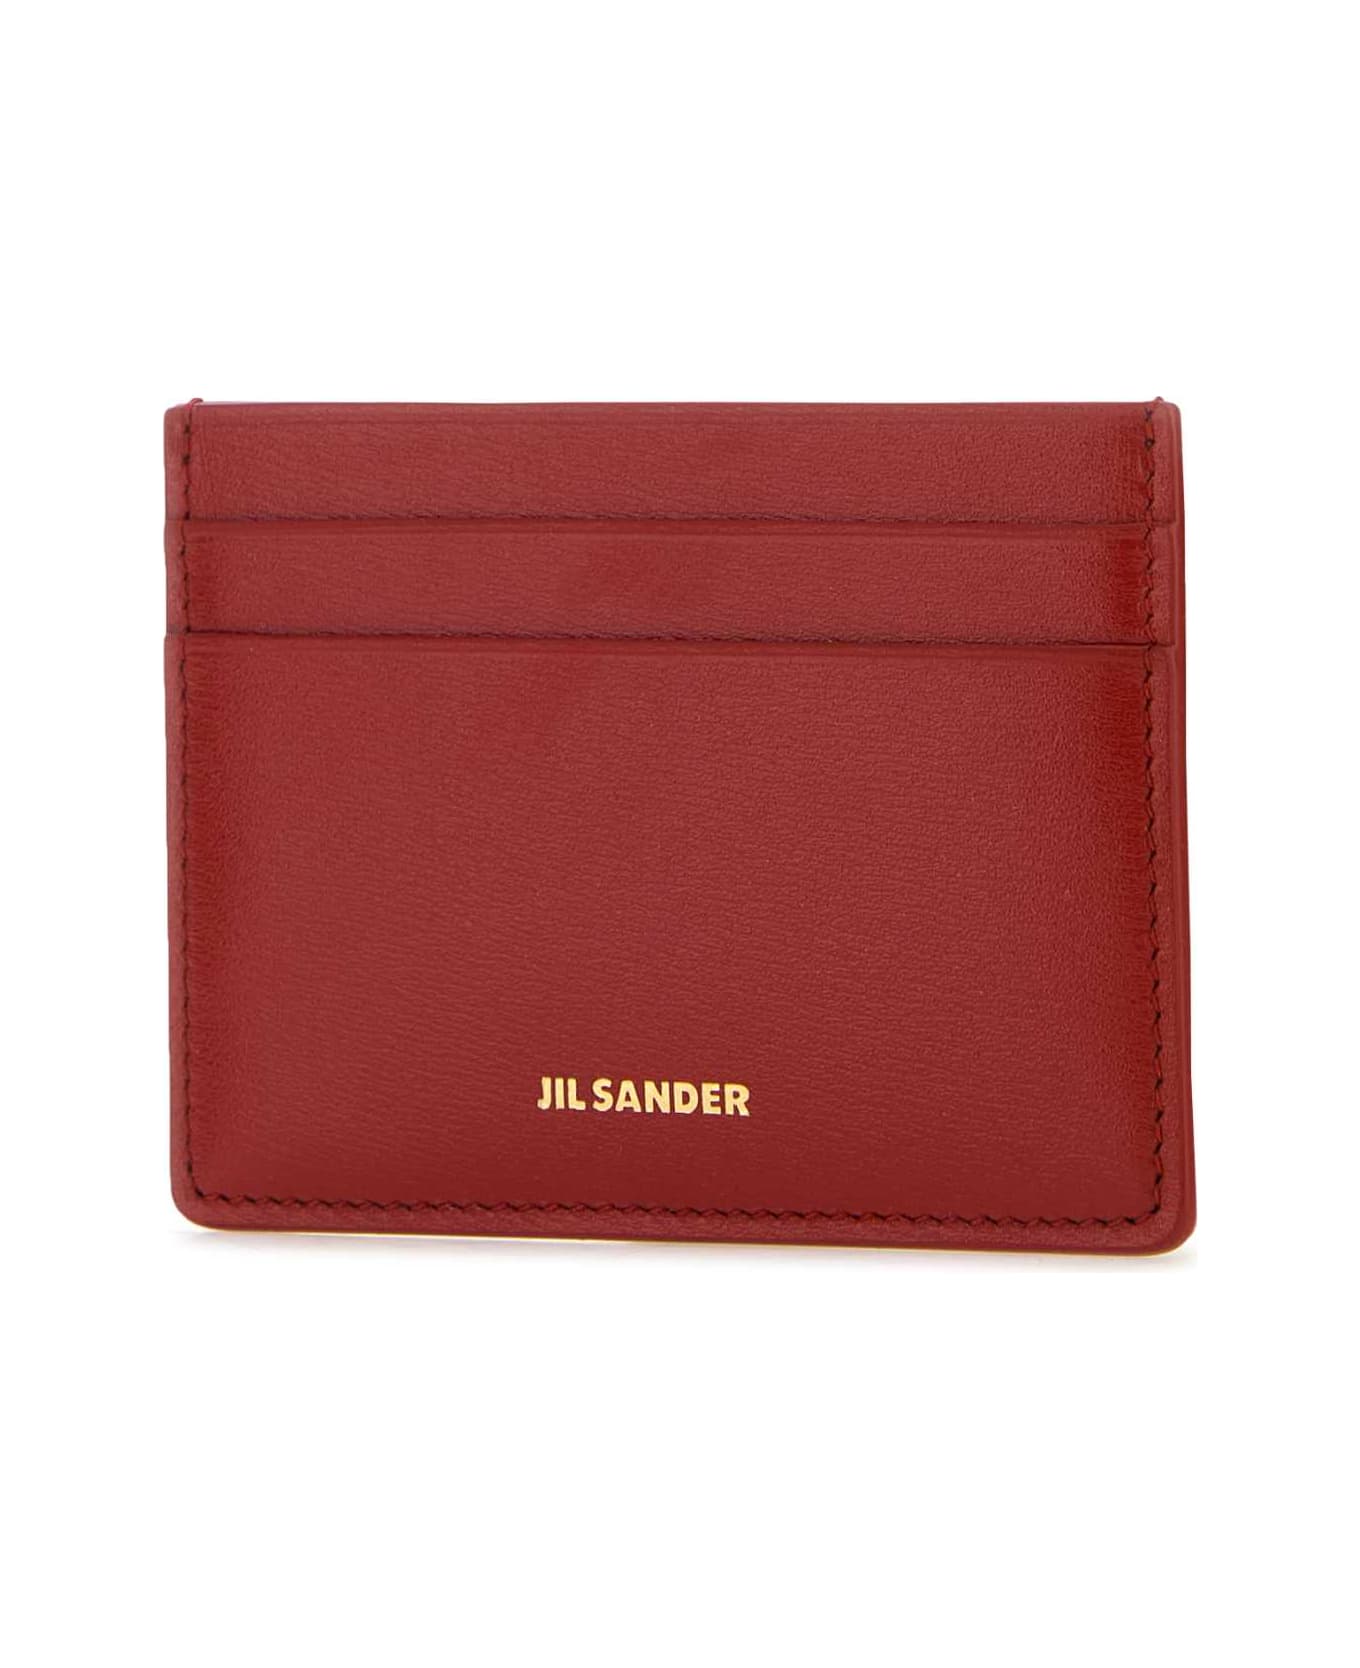 Jil Sander Tiziano Red Leather Card Holder - 613 財布